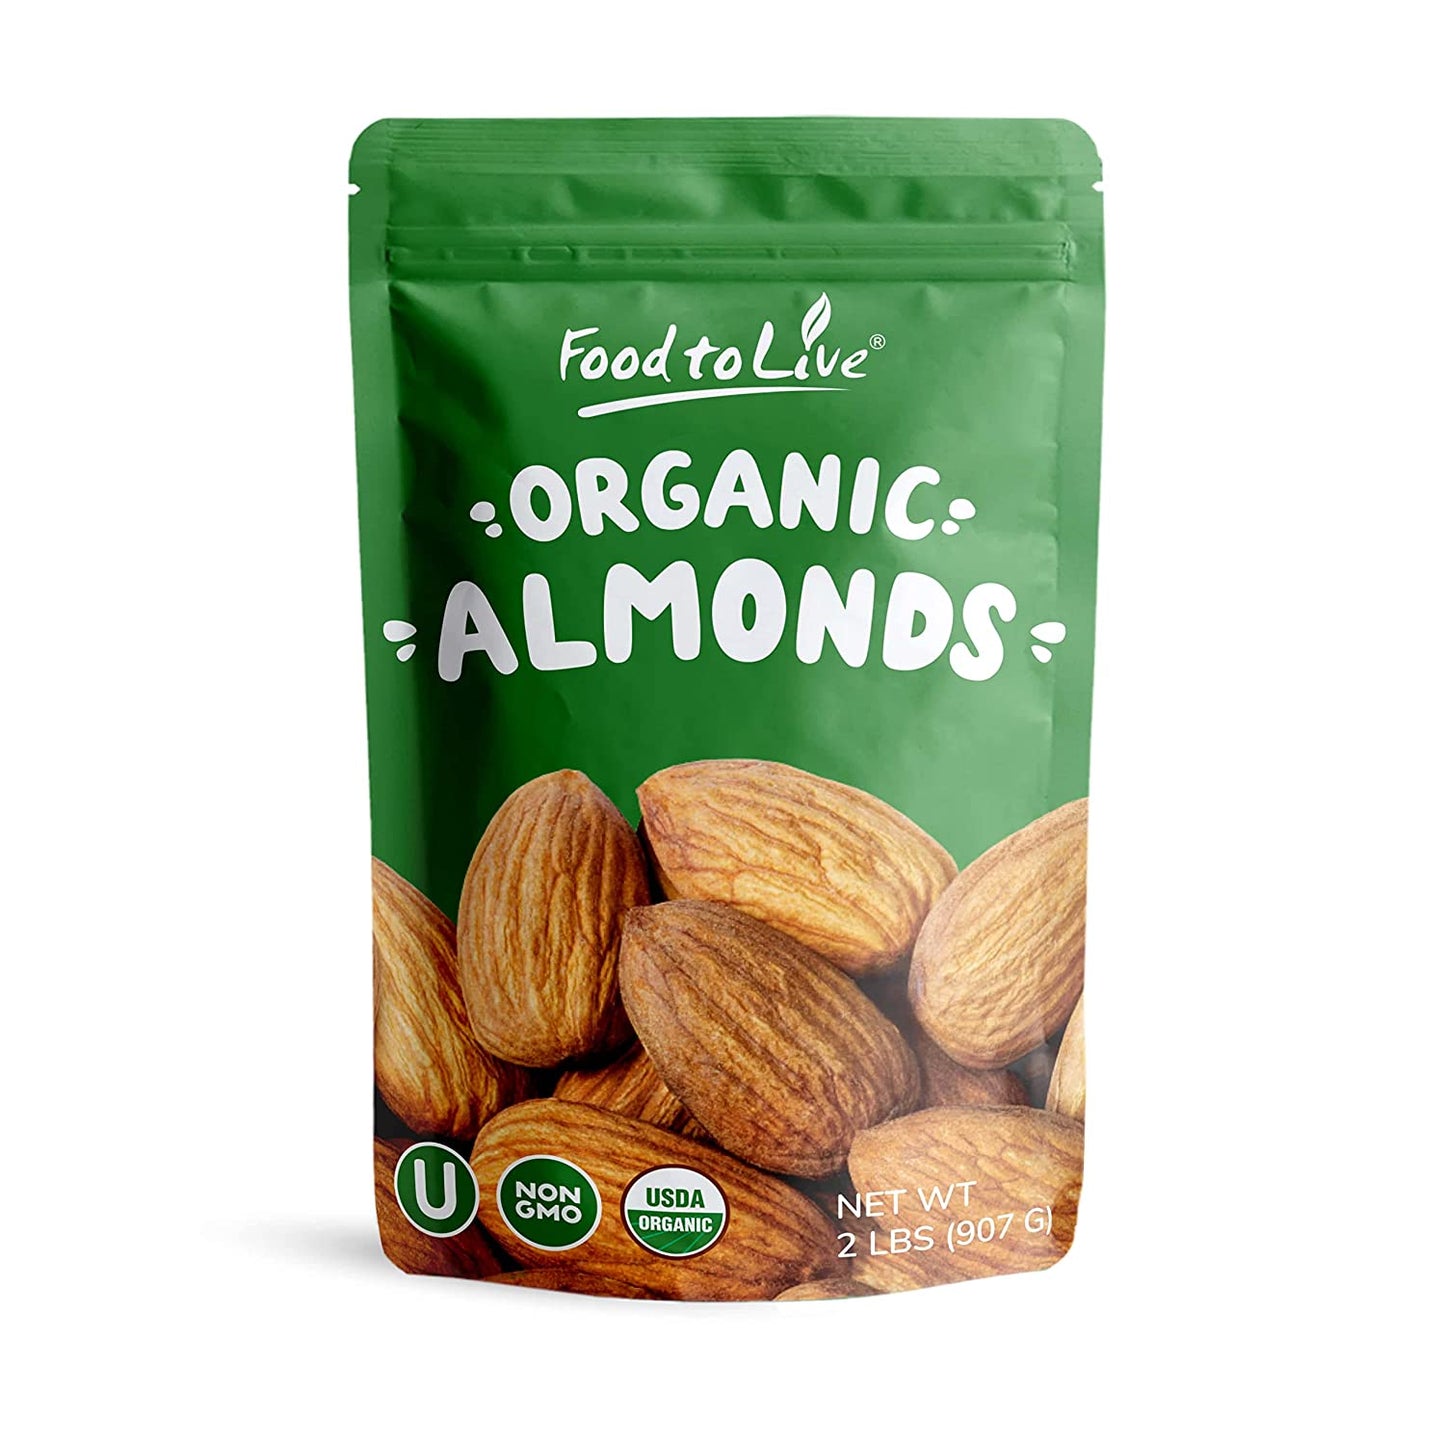 Organic California Almonds – Non-GMO, Whole, Unsalted, Unroasted, Keto, Vegan Nuts in Bulk. Rich in Vitamin E. Healthy Snack. Great for Almond Milk and Butter, Desserts and Trail Mixes